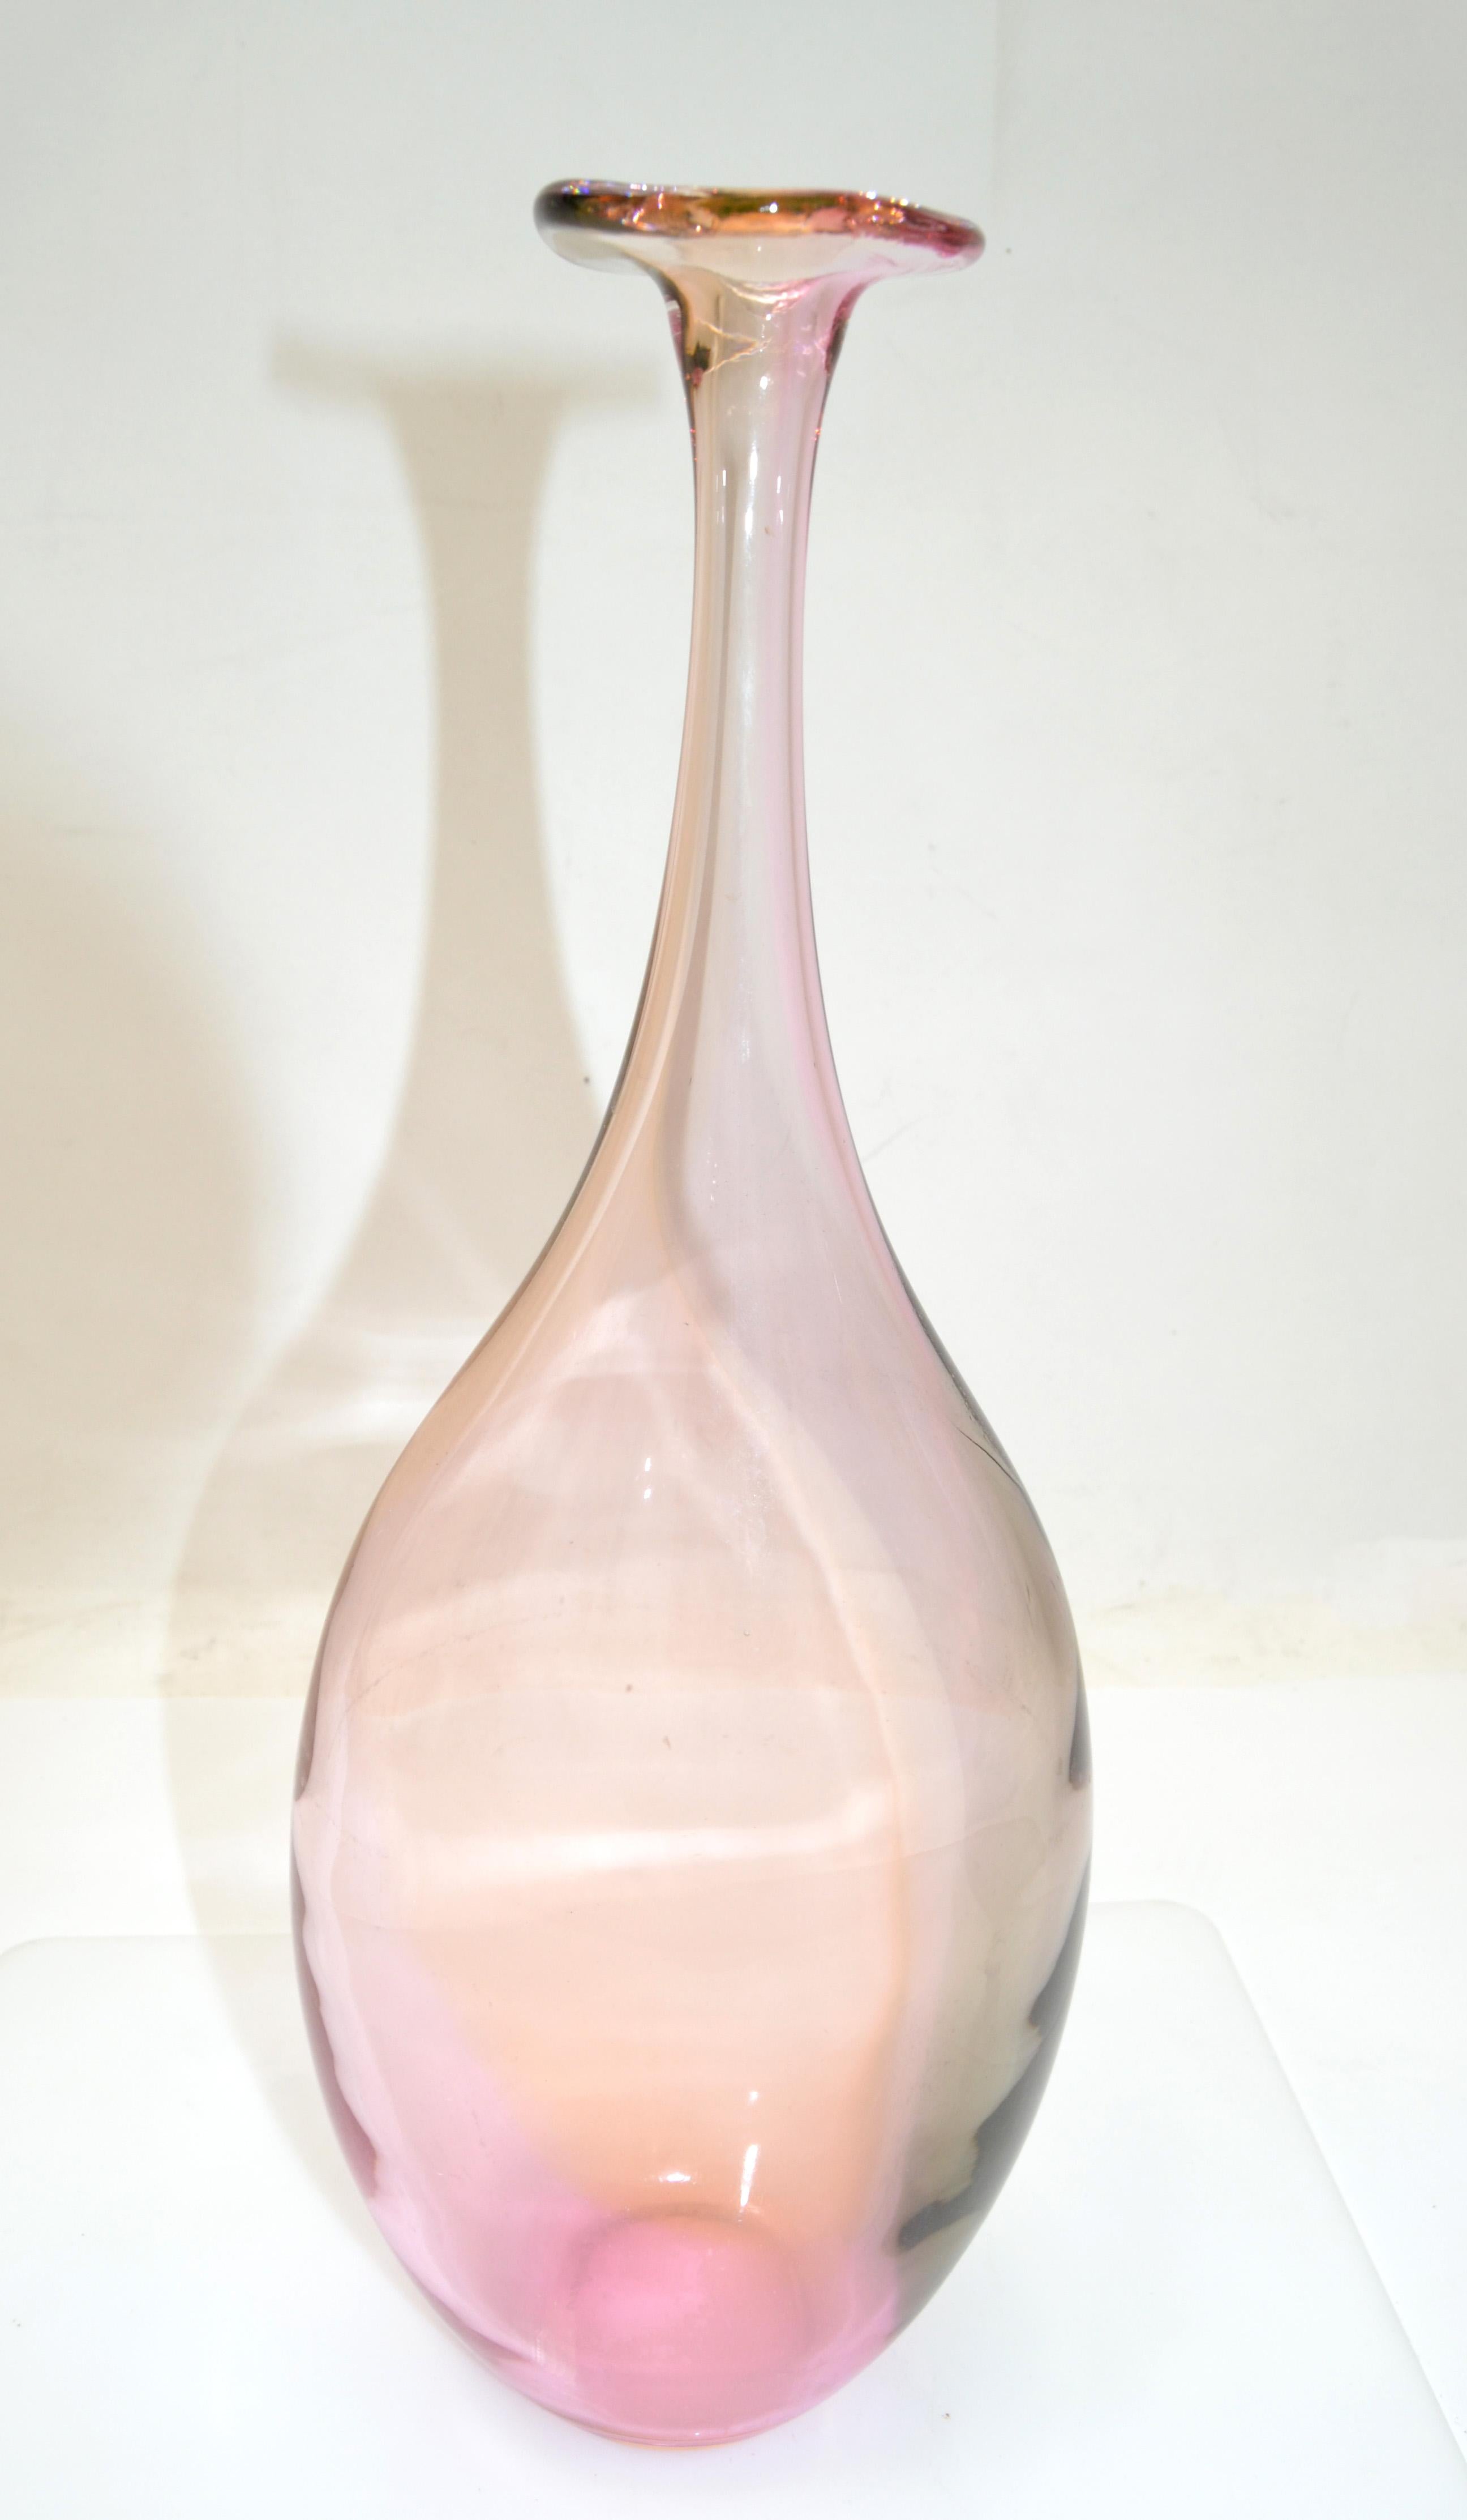 Fidji Collection Mid-Century Modern long neck bottle, art glass weed vase designed by Kjell Engman for Kosta Boda made in Sweden.
Lead-free crystal in the colors inspired by a rainbow reflection of oil spilled on water.
Engraved at the bottom and